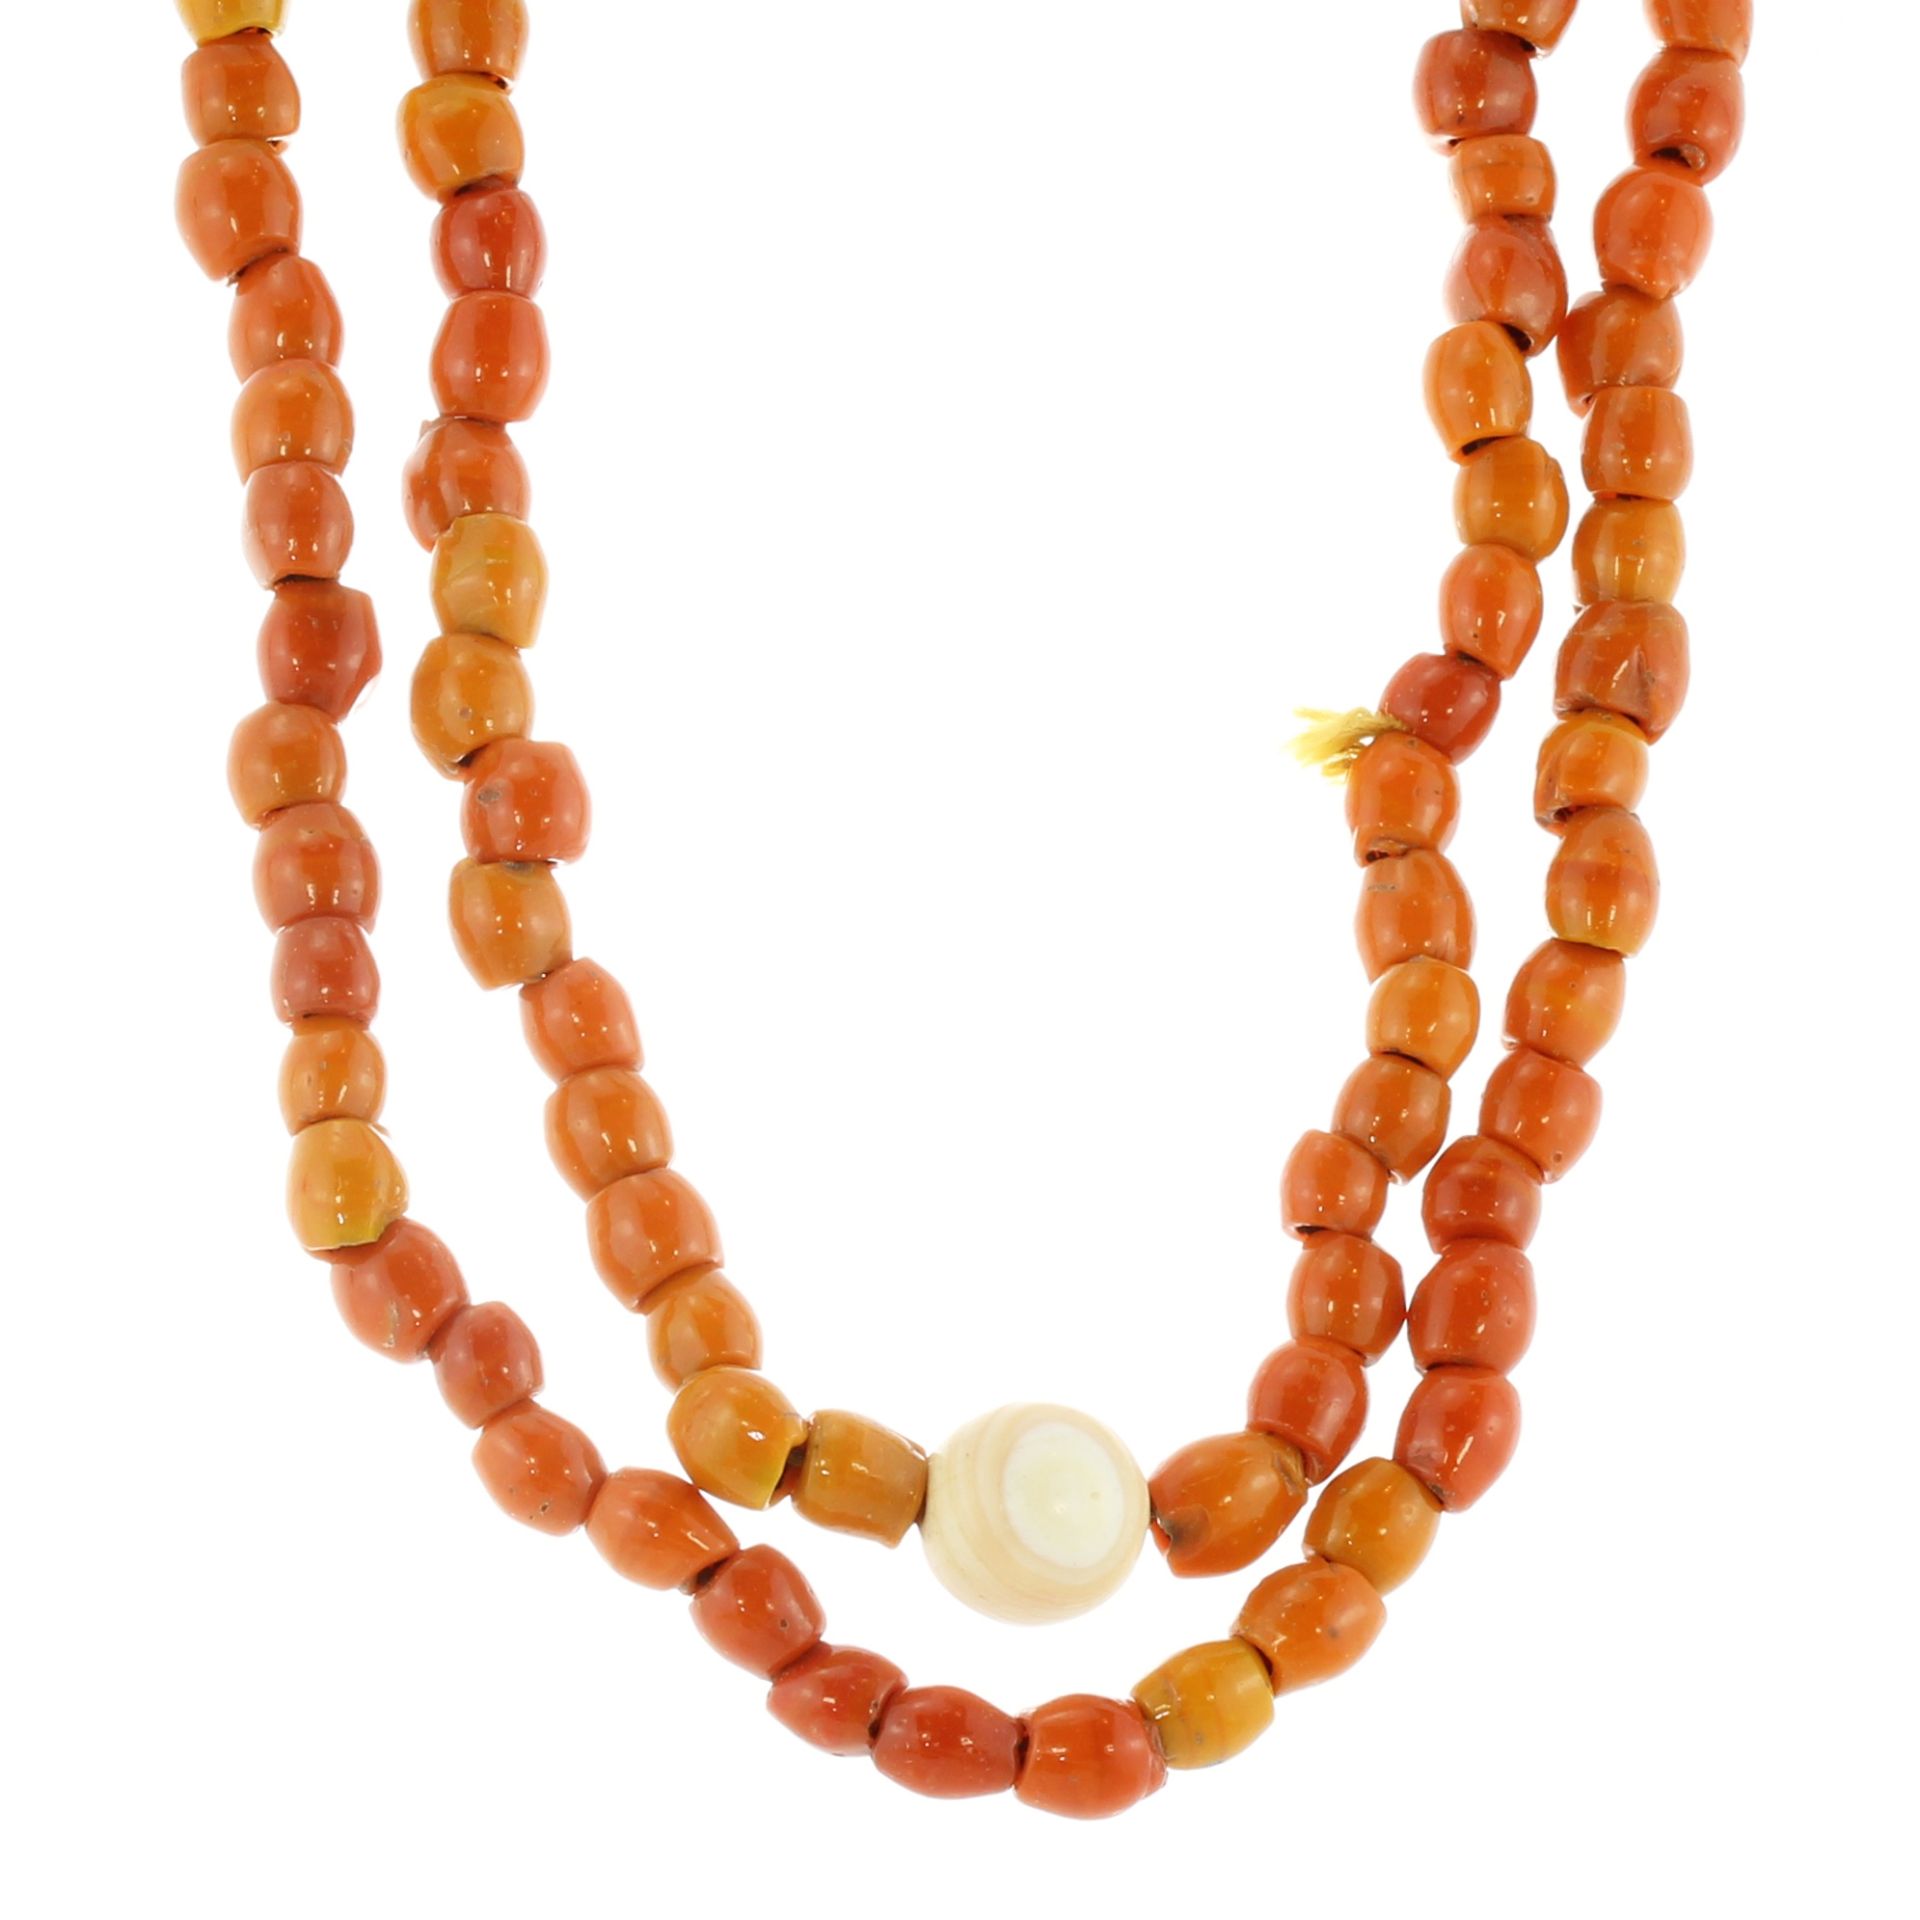 Five amber bead necklaces together with a white metal necklace, the amber necklaces each